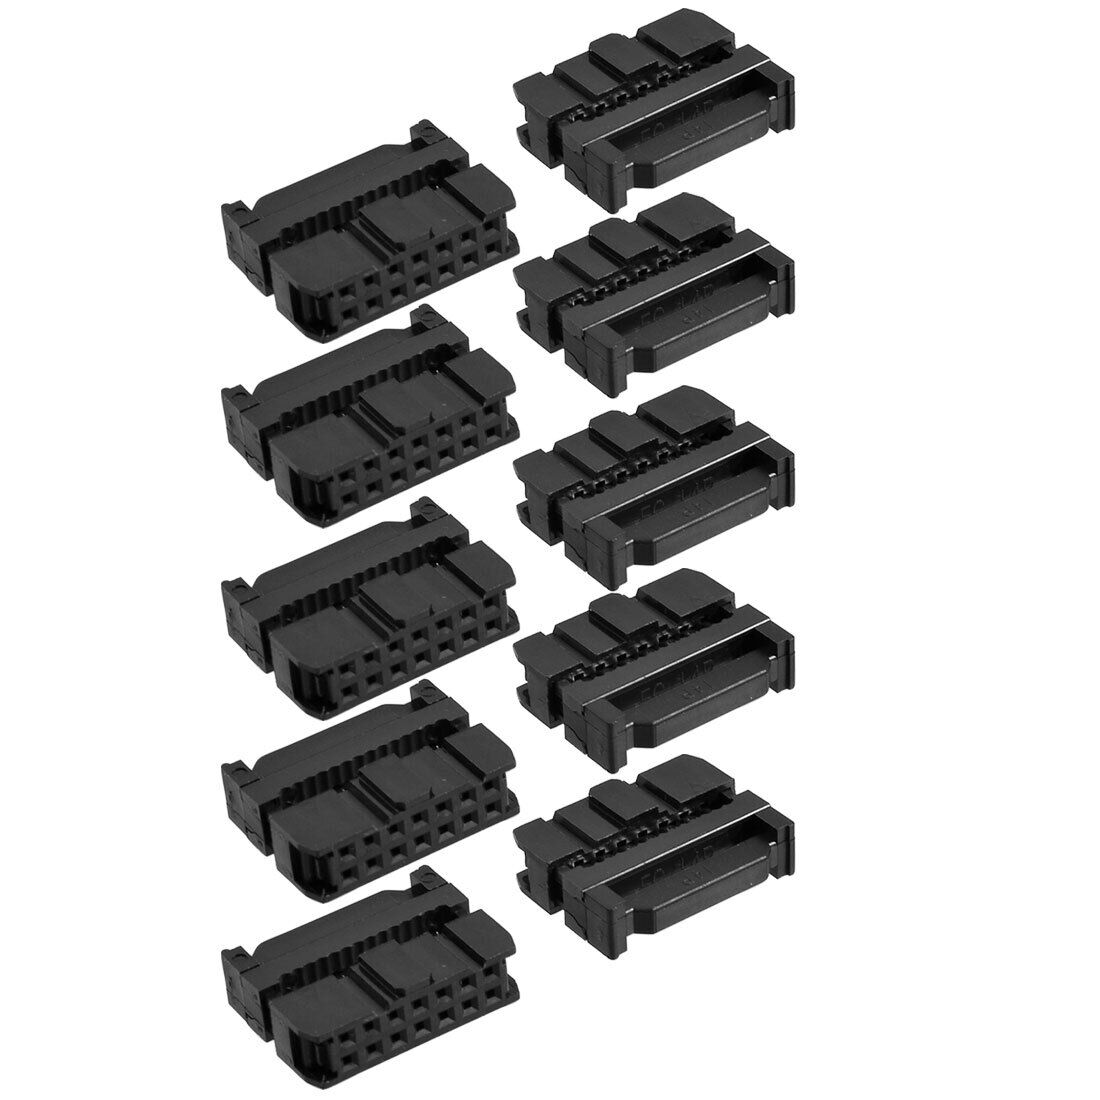 10 Pcs 2.54mm Pitch Female 14 Pins Flat Cable IDC Socket Connector Black